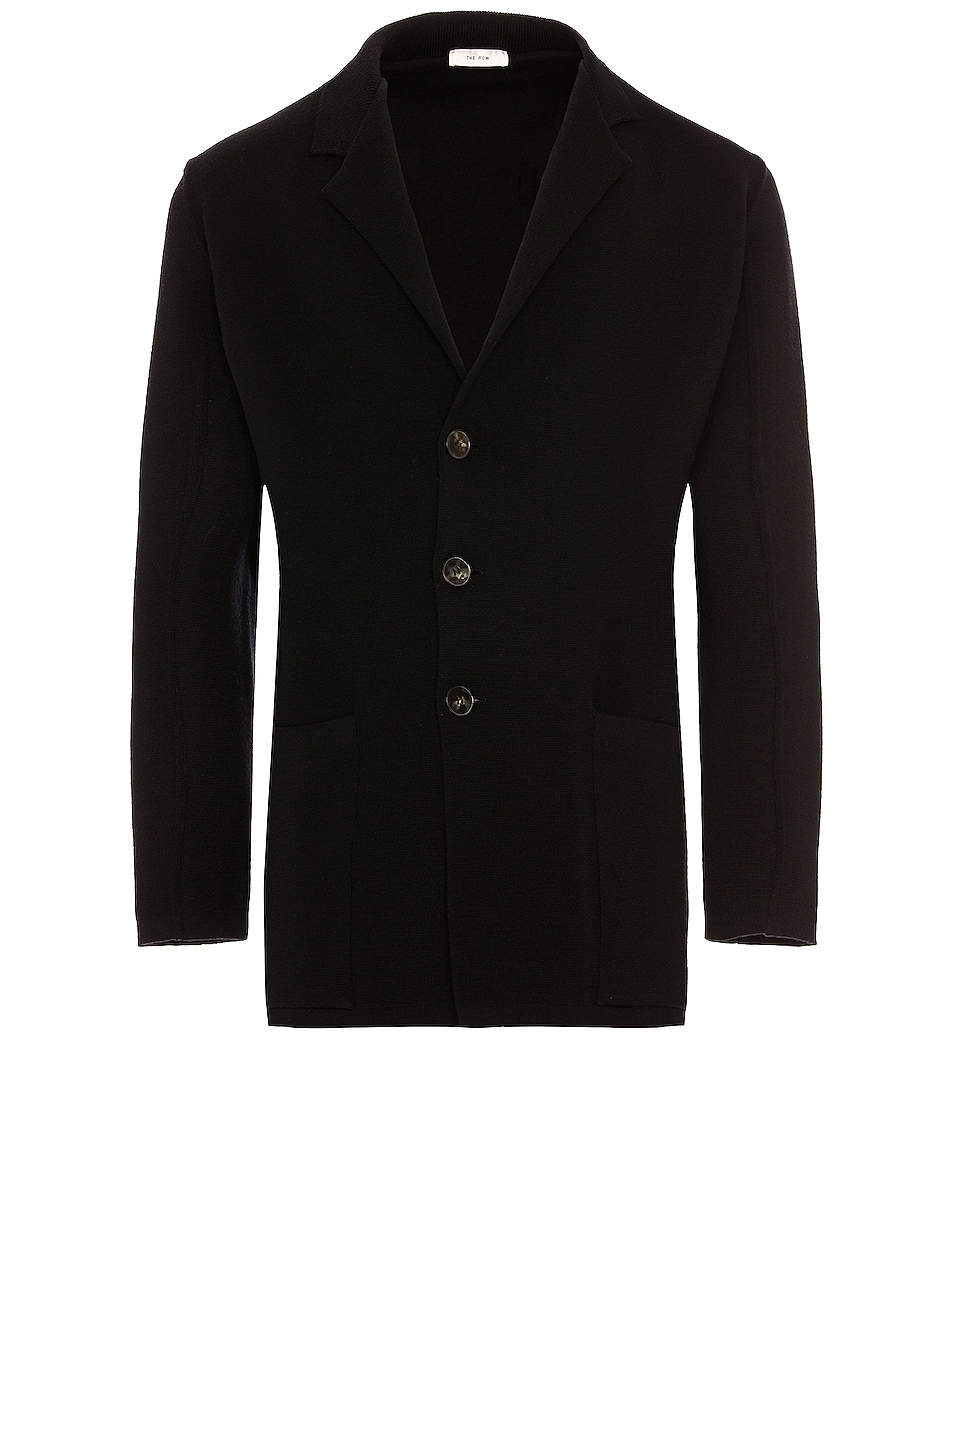 Image 1 of The Row Lubum Jacket in Black